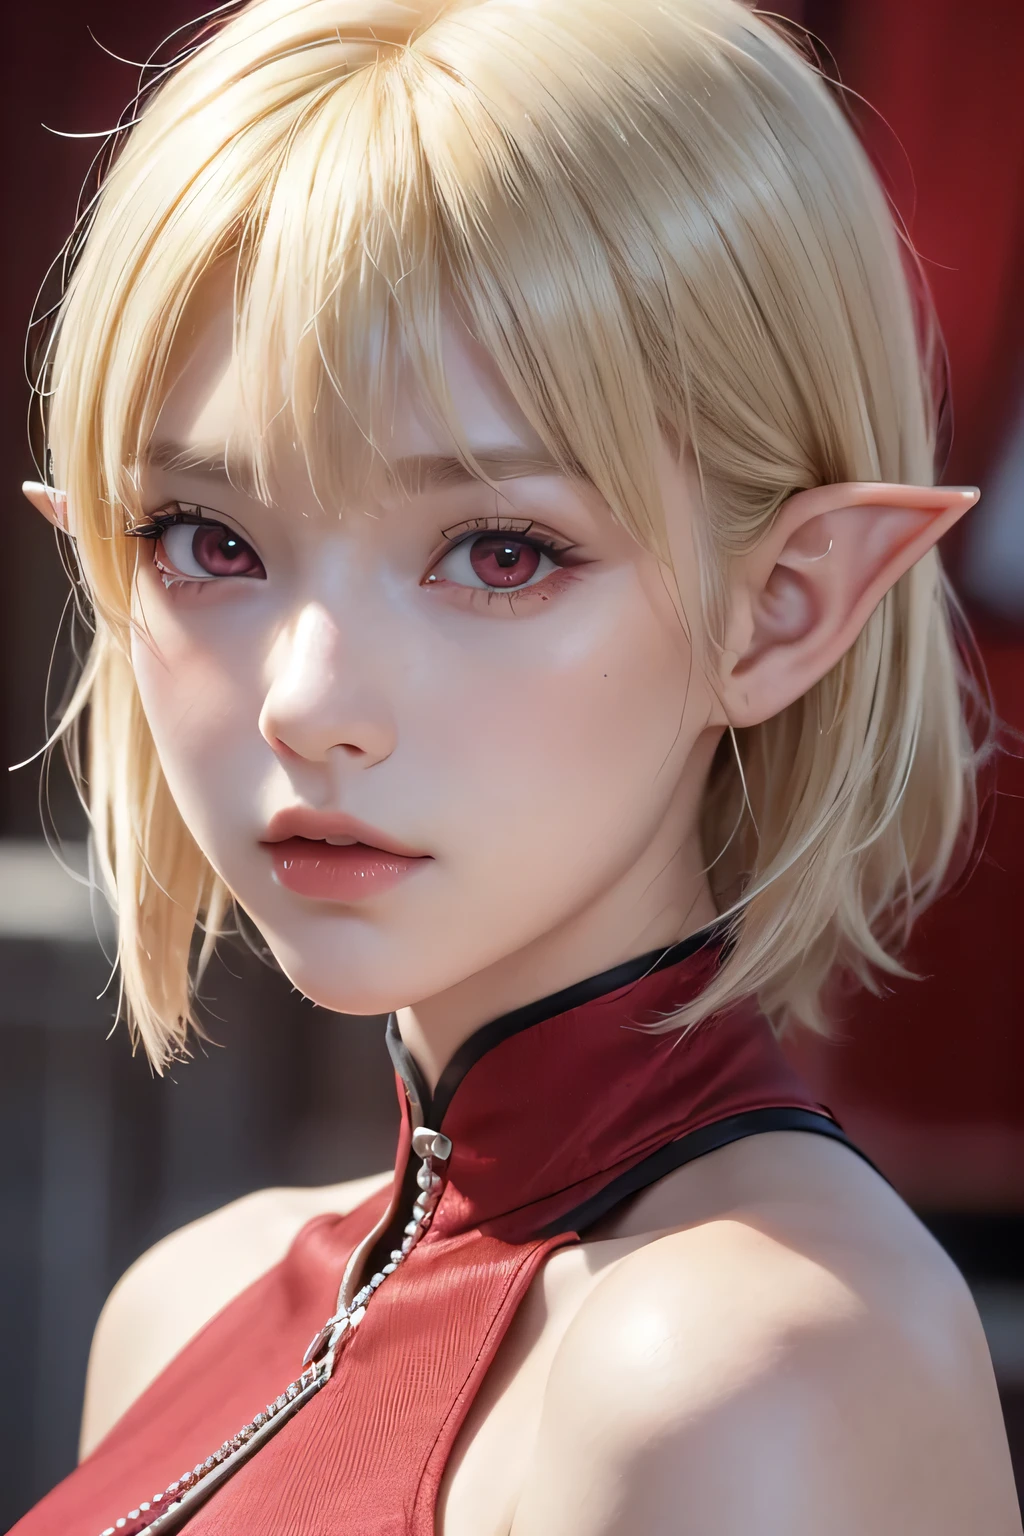 absurdres, (8k, RAW photo, best quality), masterpiece, hyper detailed, perfection, best quality, photo-realistic, (((1girl:1.2))), (((blond girl))), (((solo:1.2))), elf, elf ears, (((blond shortcut hair))), (((burgundy ends of hair))), (((scarlet red eyes))), (slanted red eyes, tsurime), blond eyebrows, (hair ornament), (portrait:1.34), face shot, full-length:1.5, (((fashion model pose))), at schoolyard, daylight, amazing shadow, close-up, ((red watery eyes)), (((face close-up))):1.4, hair ornament, black battle suit